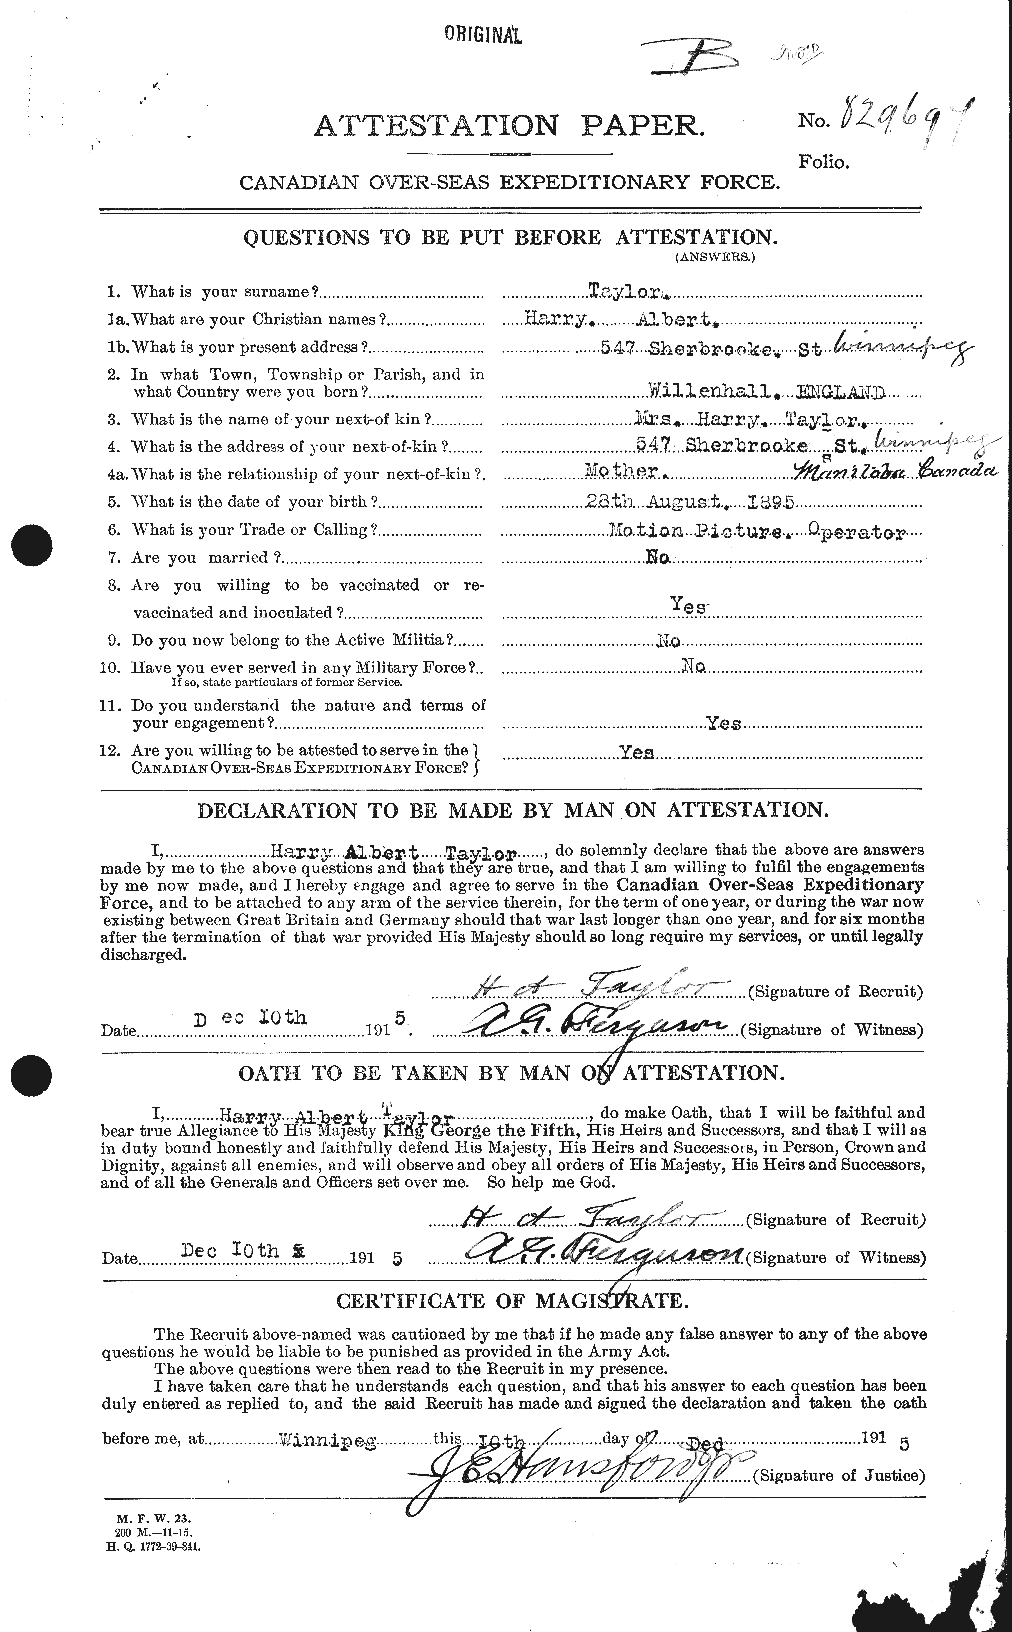 Personnel Records of the First World War - CEF 626480a